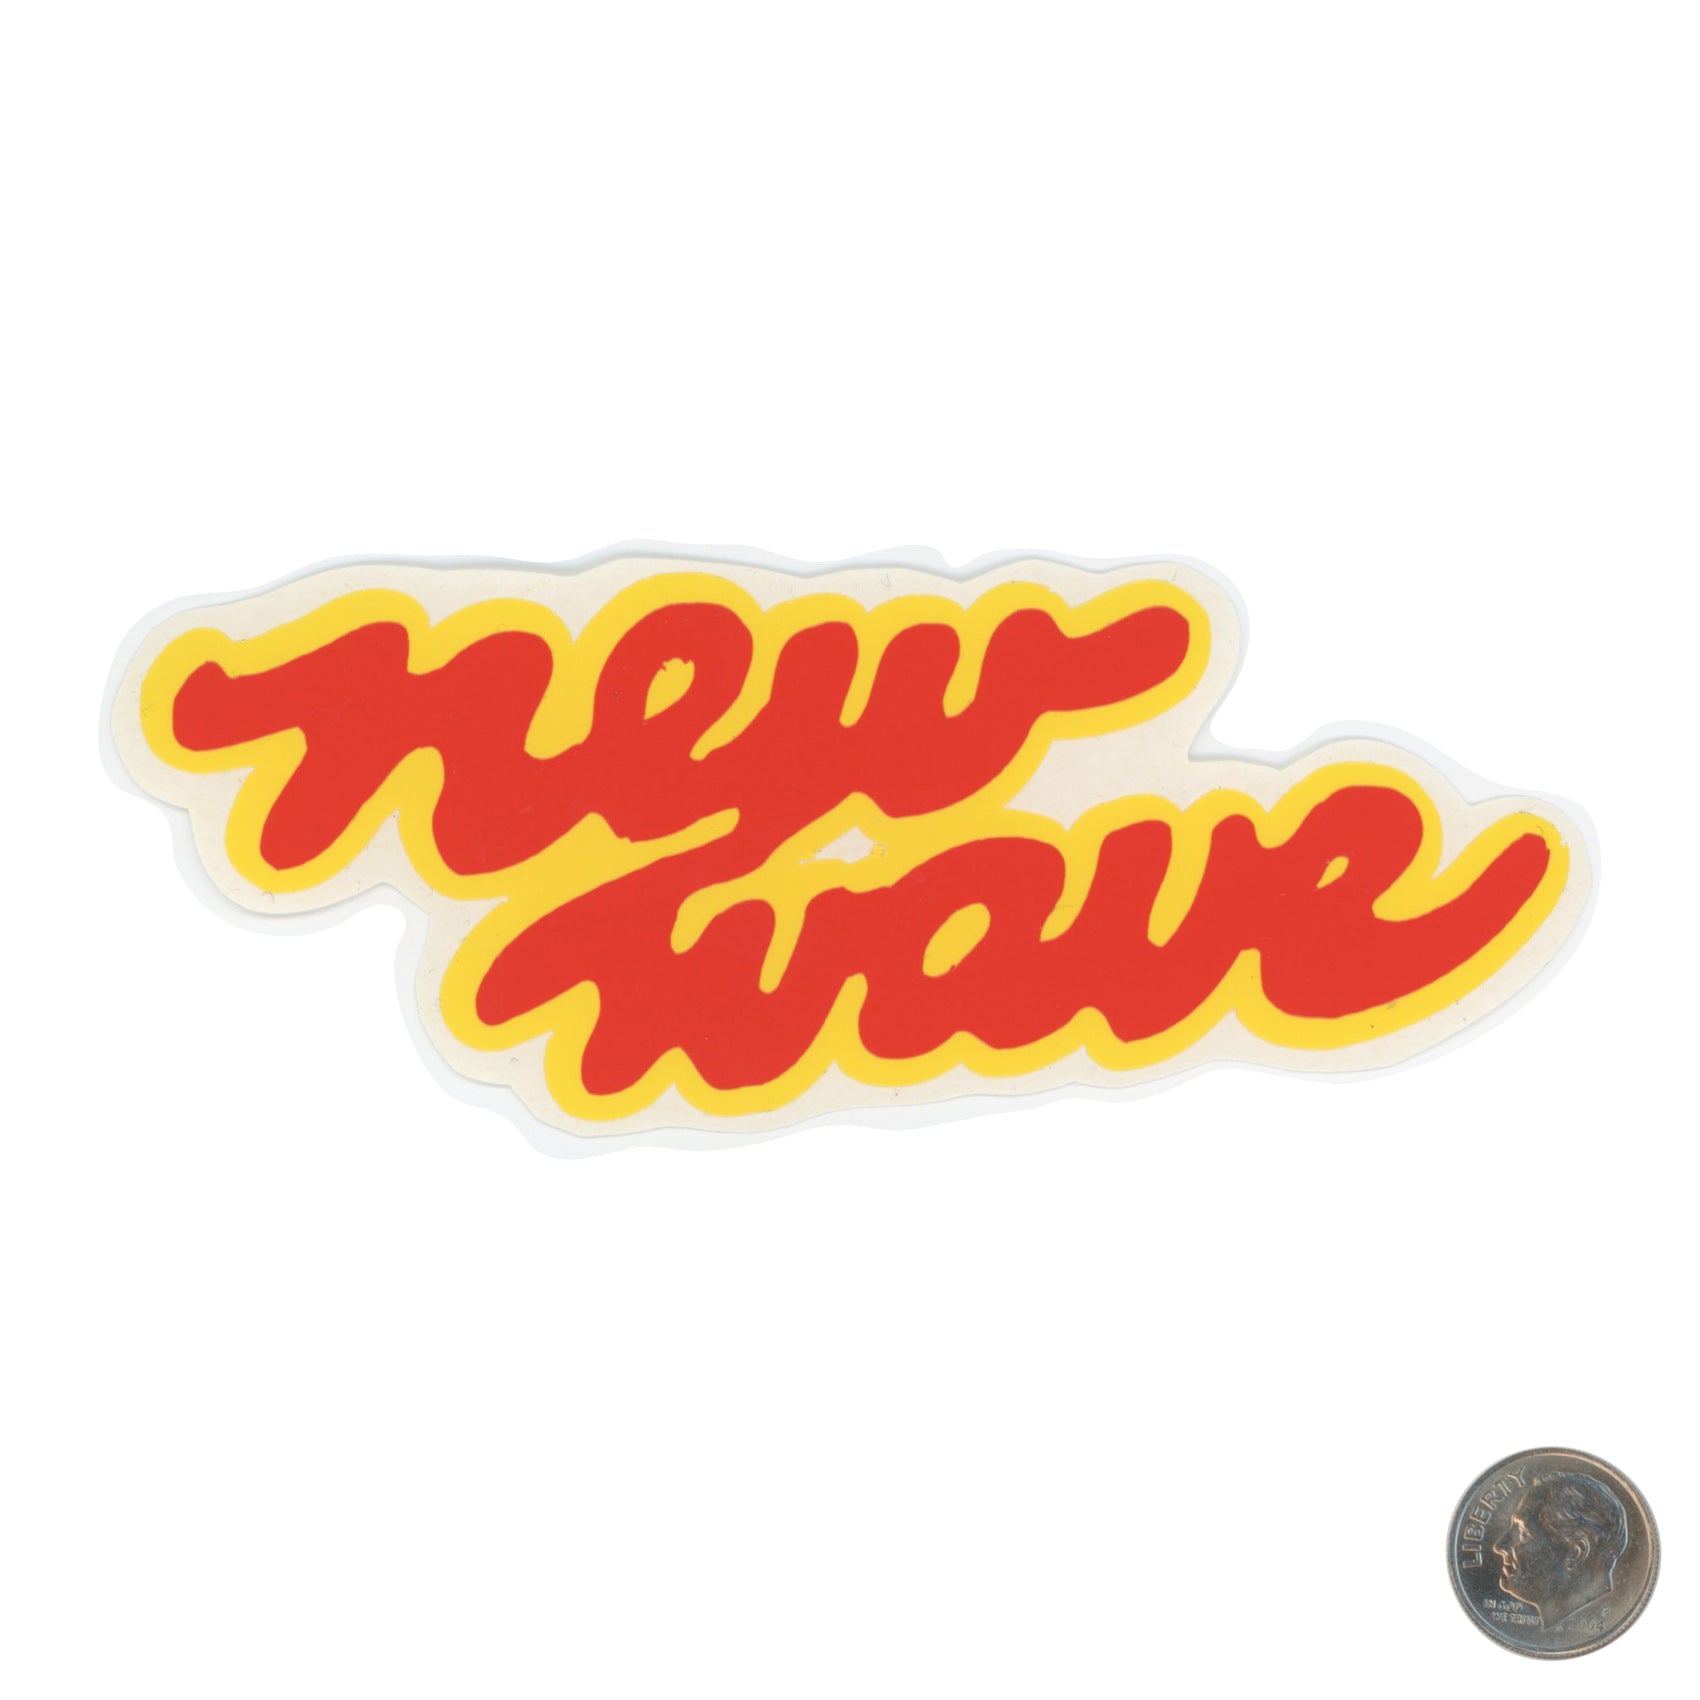 NEW WAVE YELLOW RED Sticker with dime